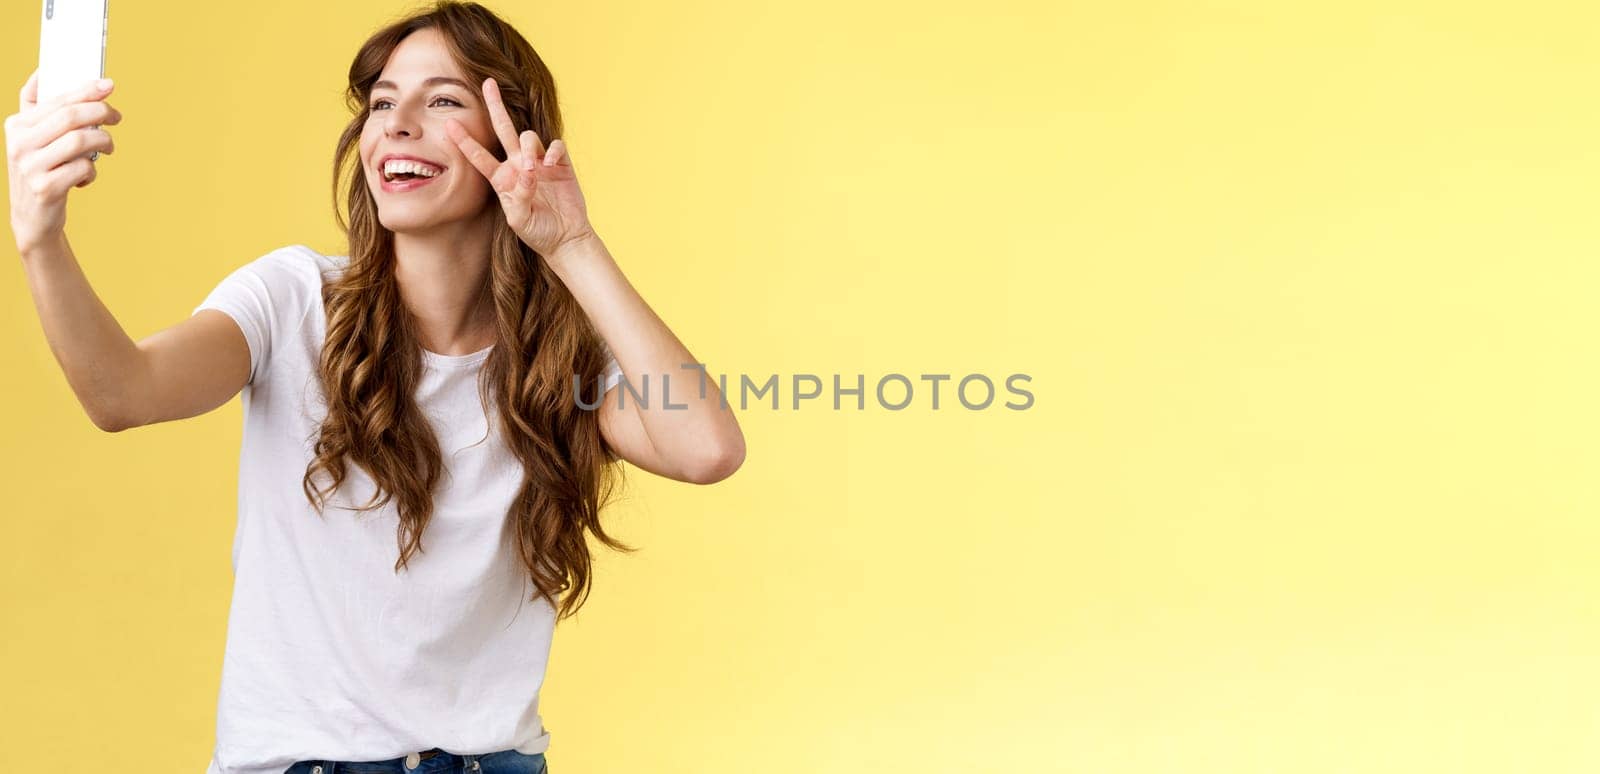 Positive charisamtic happy young girl curly-haired raise smartphone taking selfie show peace victory sign having video call stand yellow background smiling mobile front camera posing lively. Lifestyle.